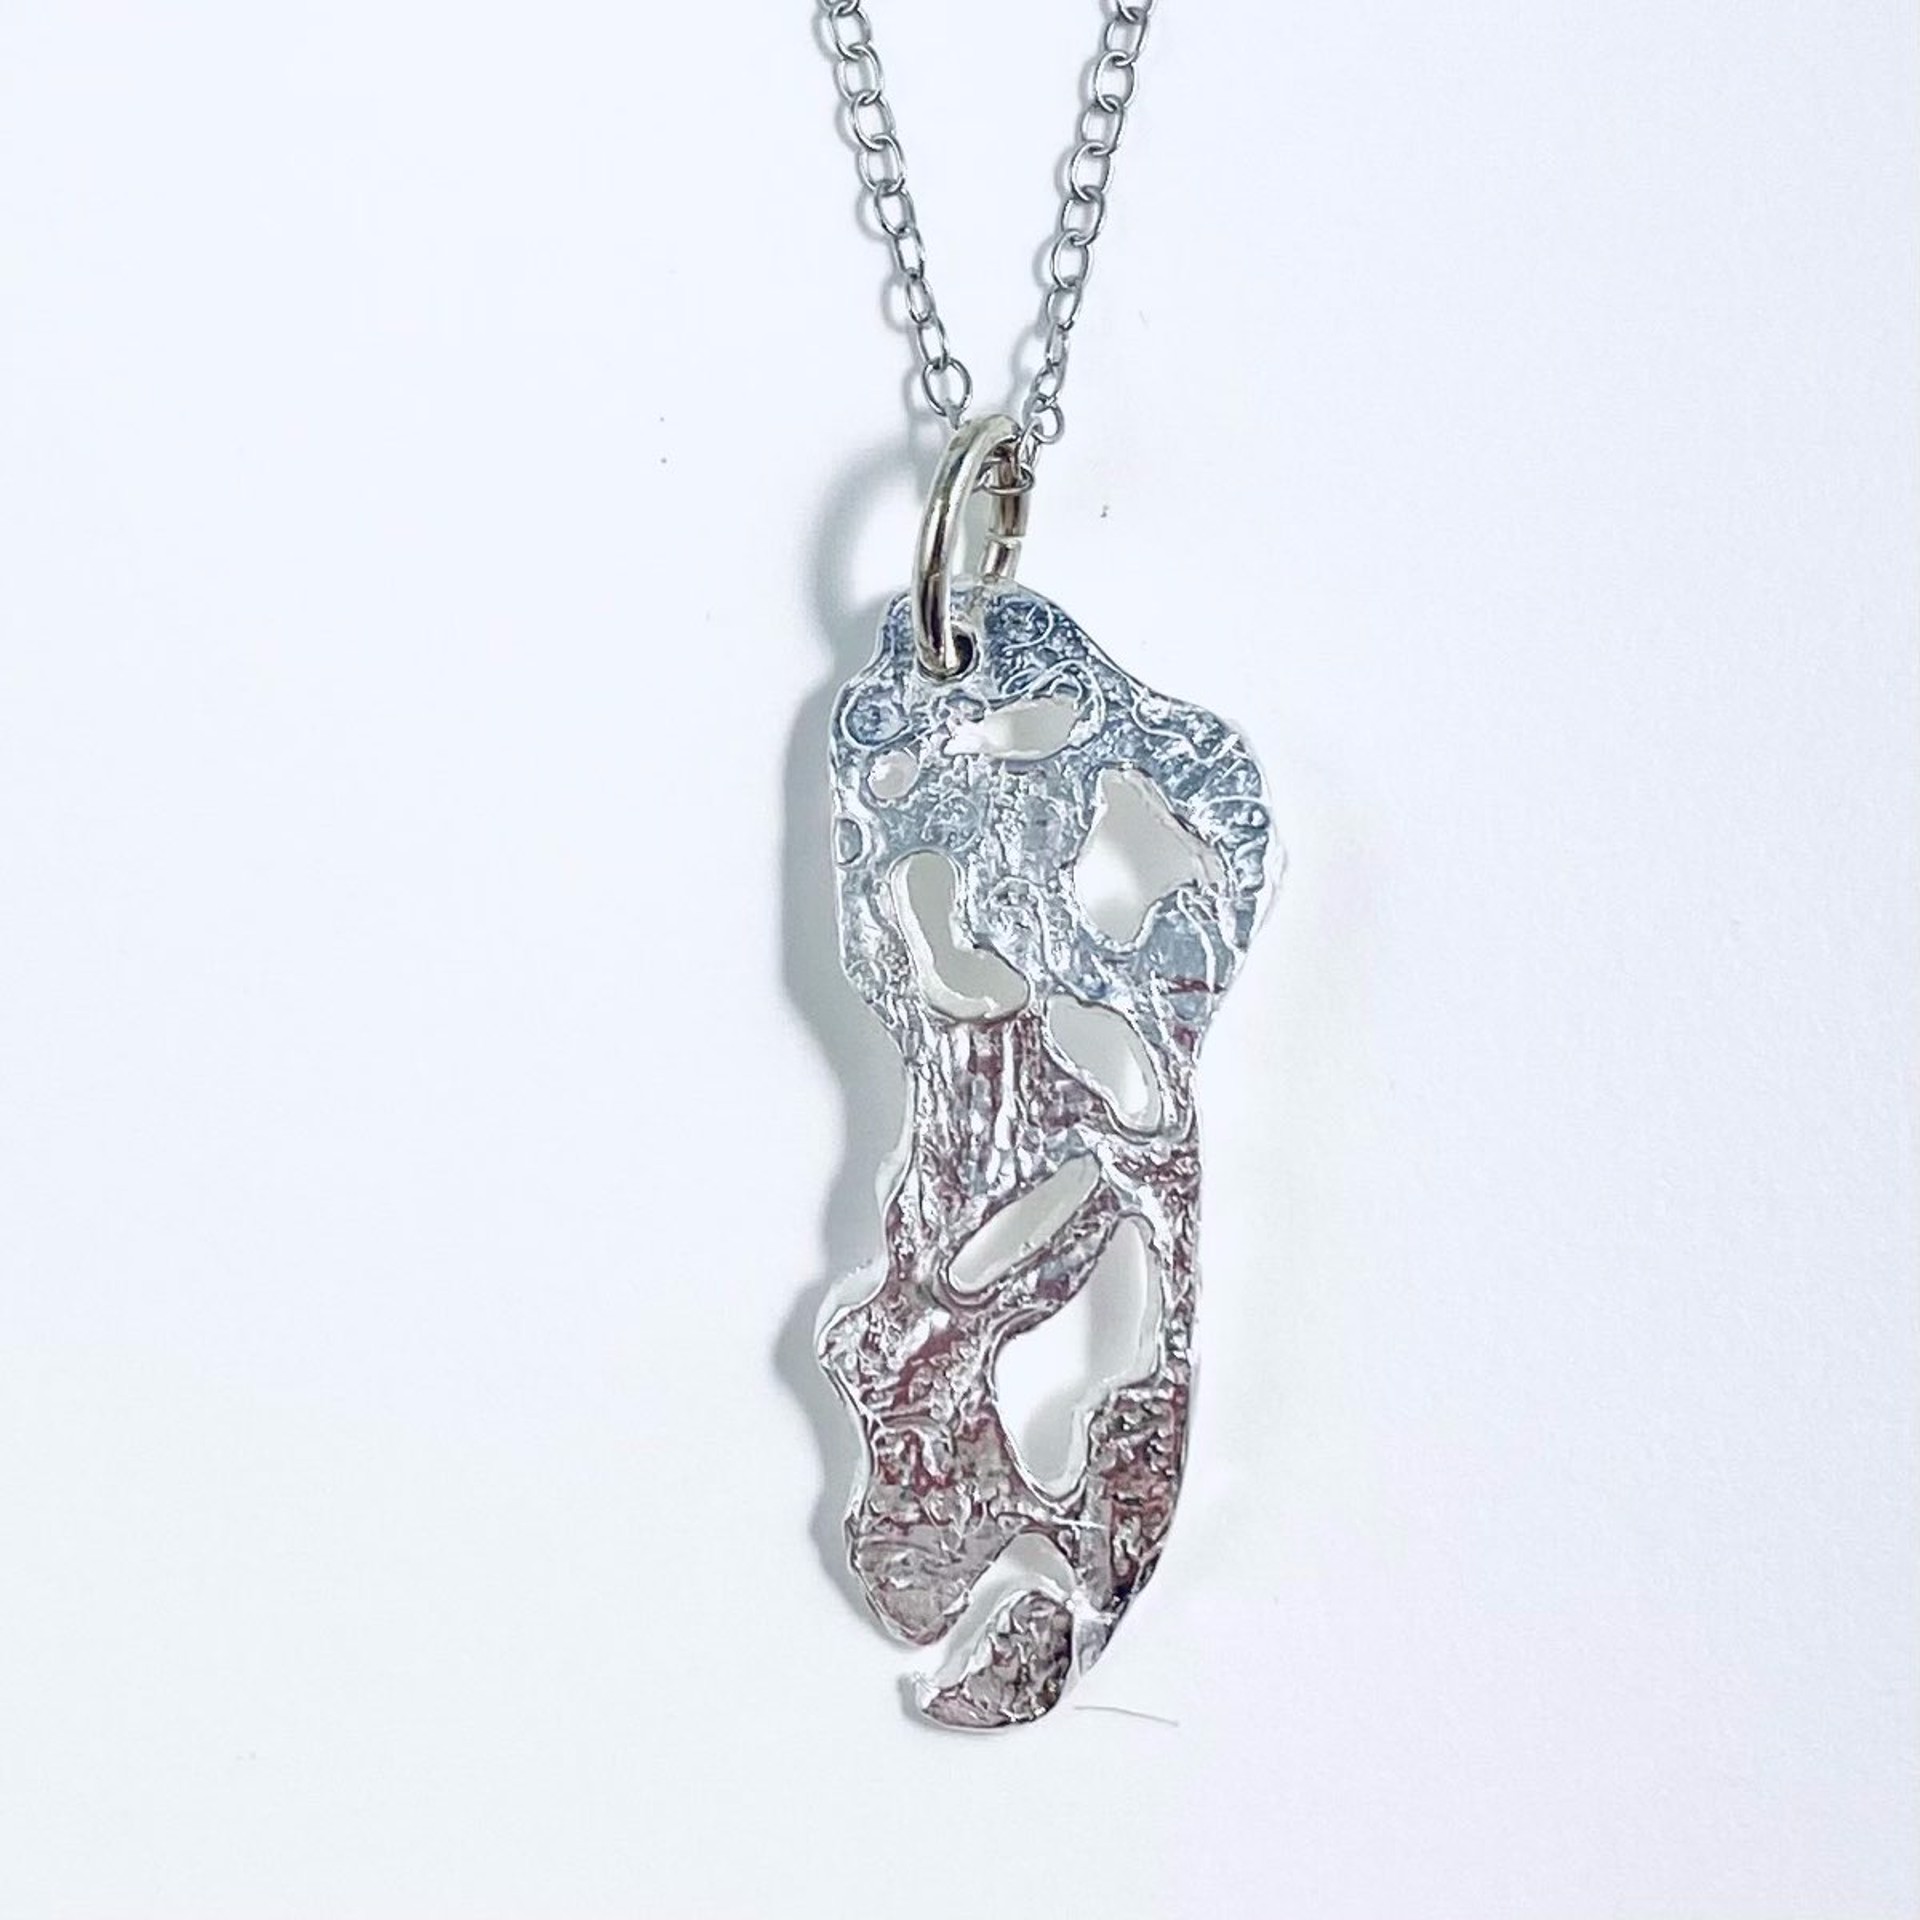 KH22-4 Abstract Silver Pendant, 18”  Silver Chain by Karen Hakim